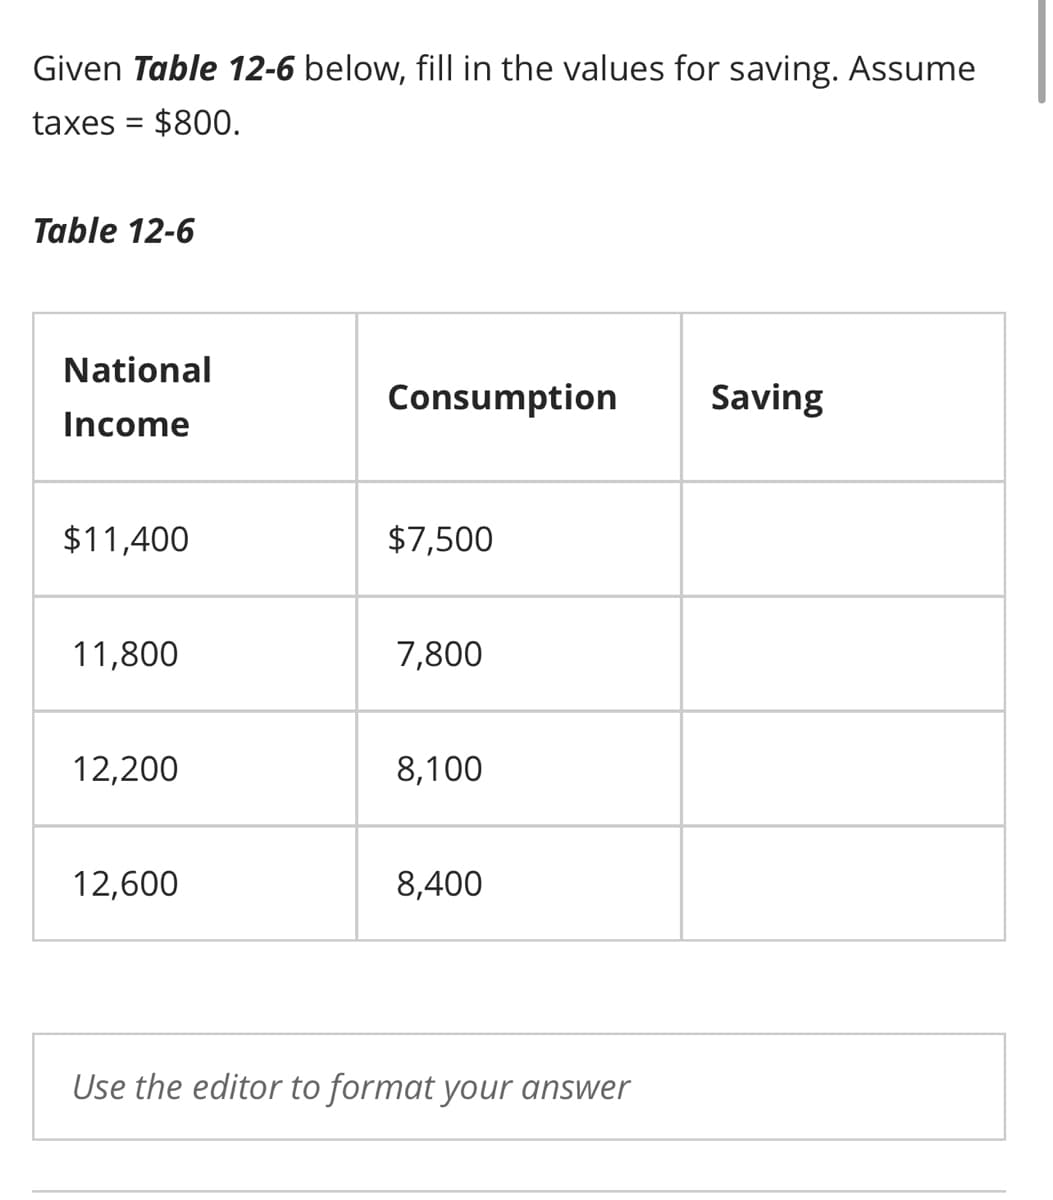 Given Table 12-6 below, fill in the values for saving. Assume
taxes = $800.
Table 12-6
National
Income
$11,400
11,800
12,200
12,600
Consumption
$7,500
7,800
8,100
8,400
Use the editor to format your answer
Saving